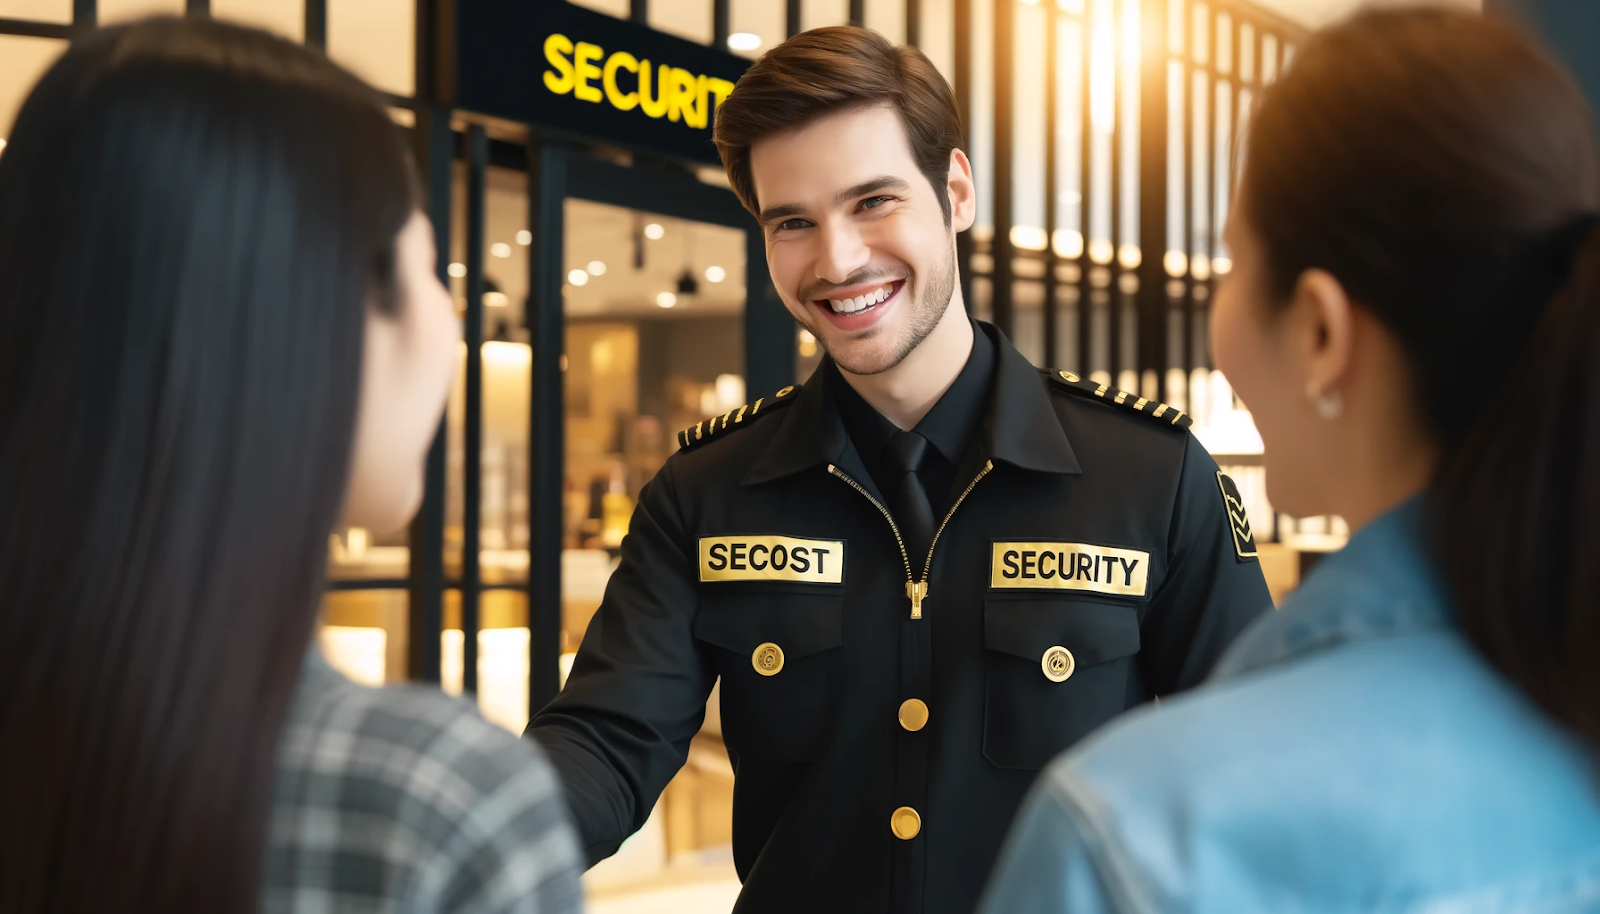 Cheerful security guard assisting customers at a retail store entrance, emphasizing customer safety in retail environments.